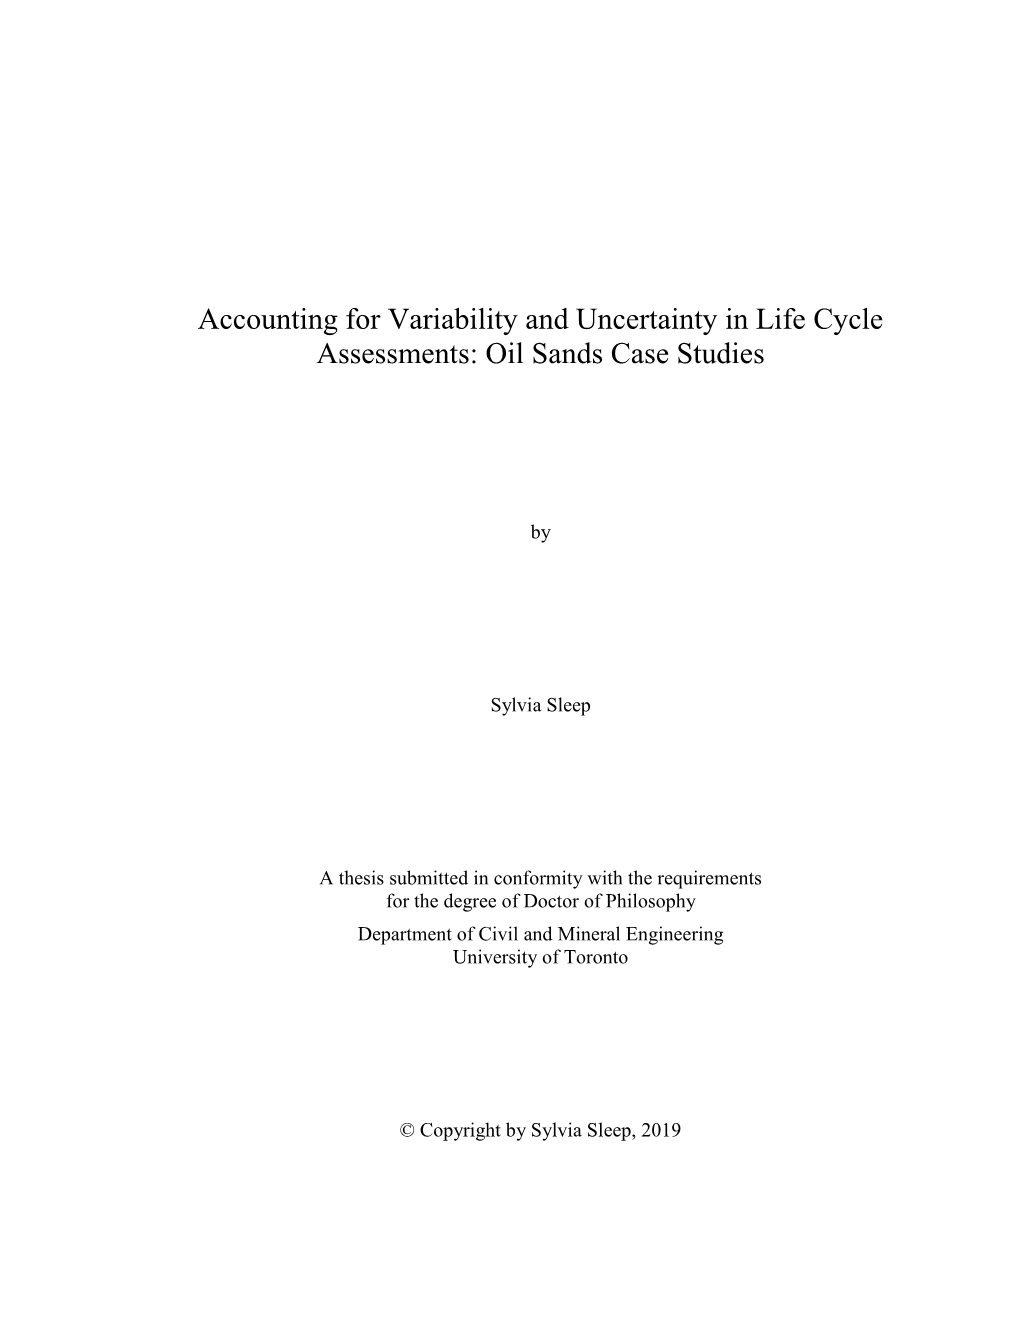 Accounting for Variability and Uncertainty in Life Cycle Assessments: Oil Sands Case Studies